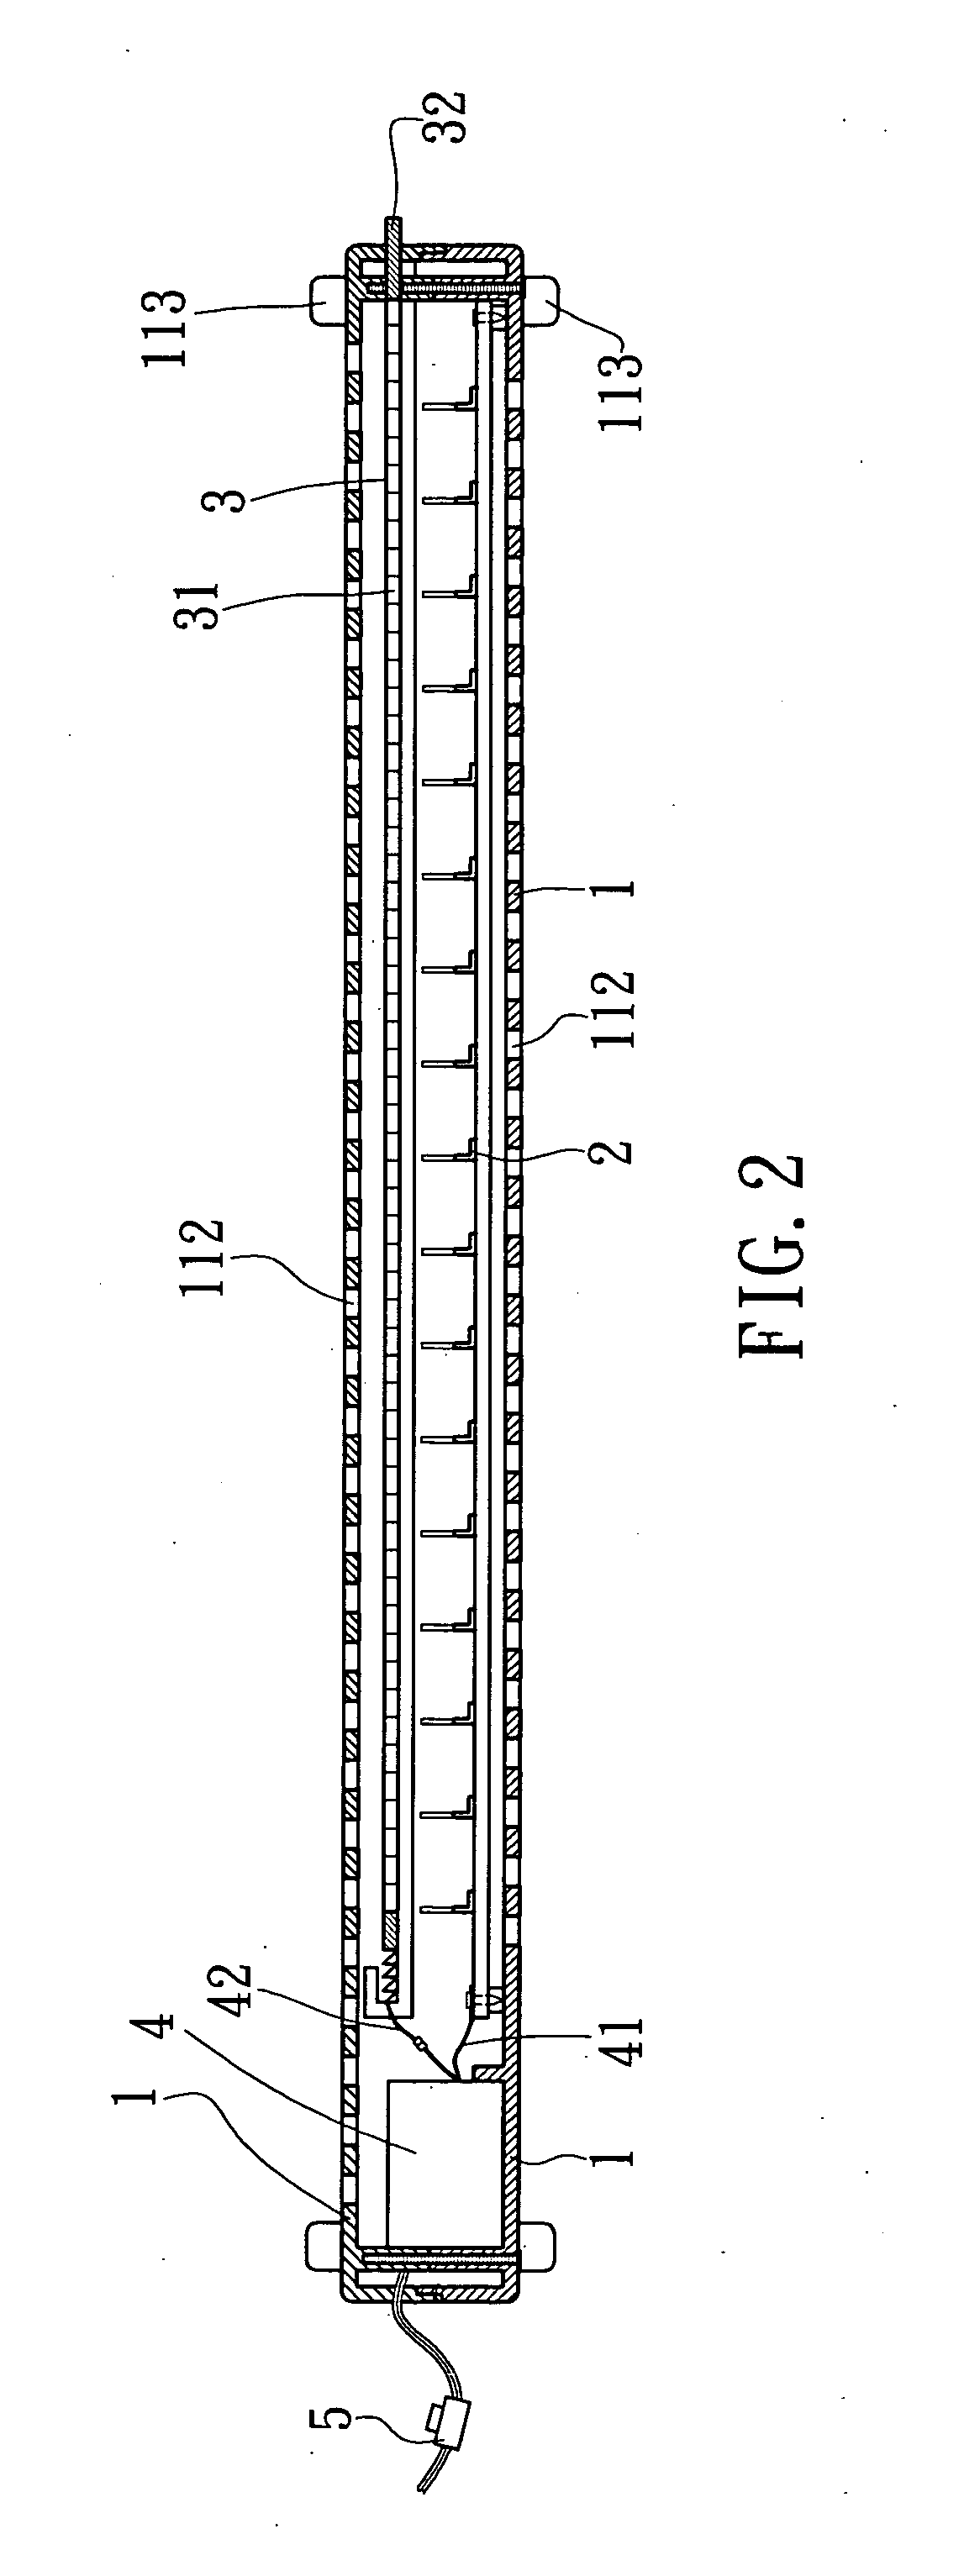 Anion generator for use with a computer for cooling purpose